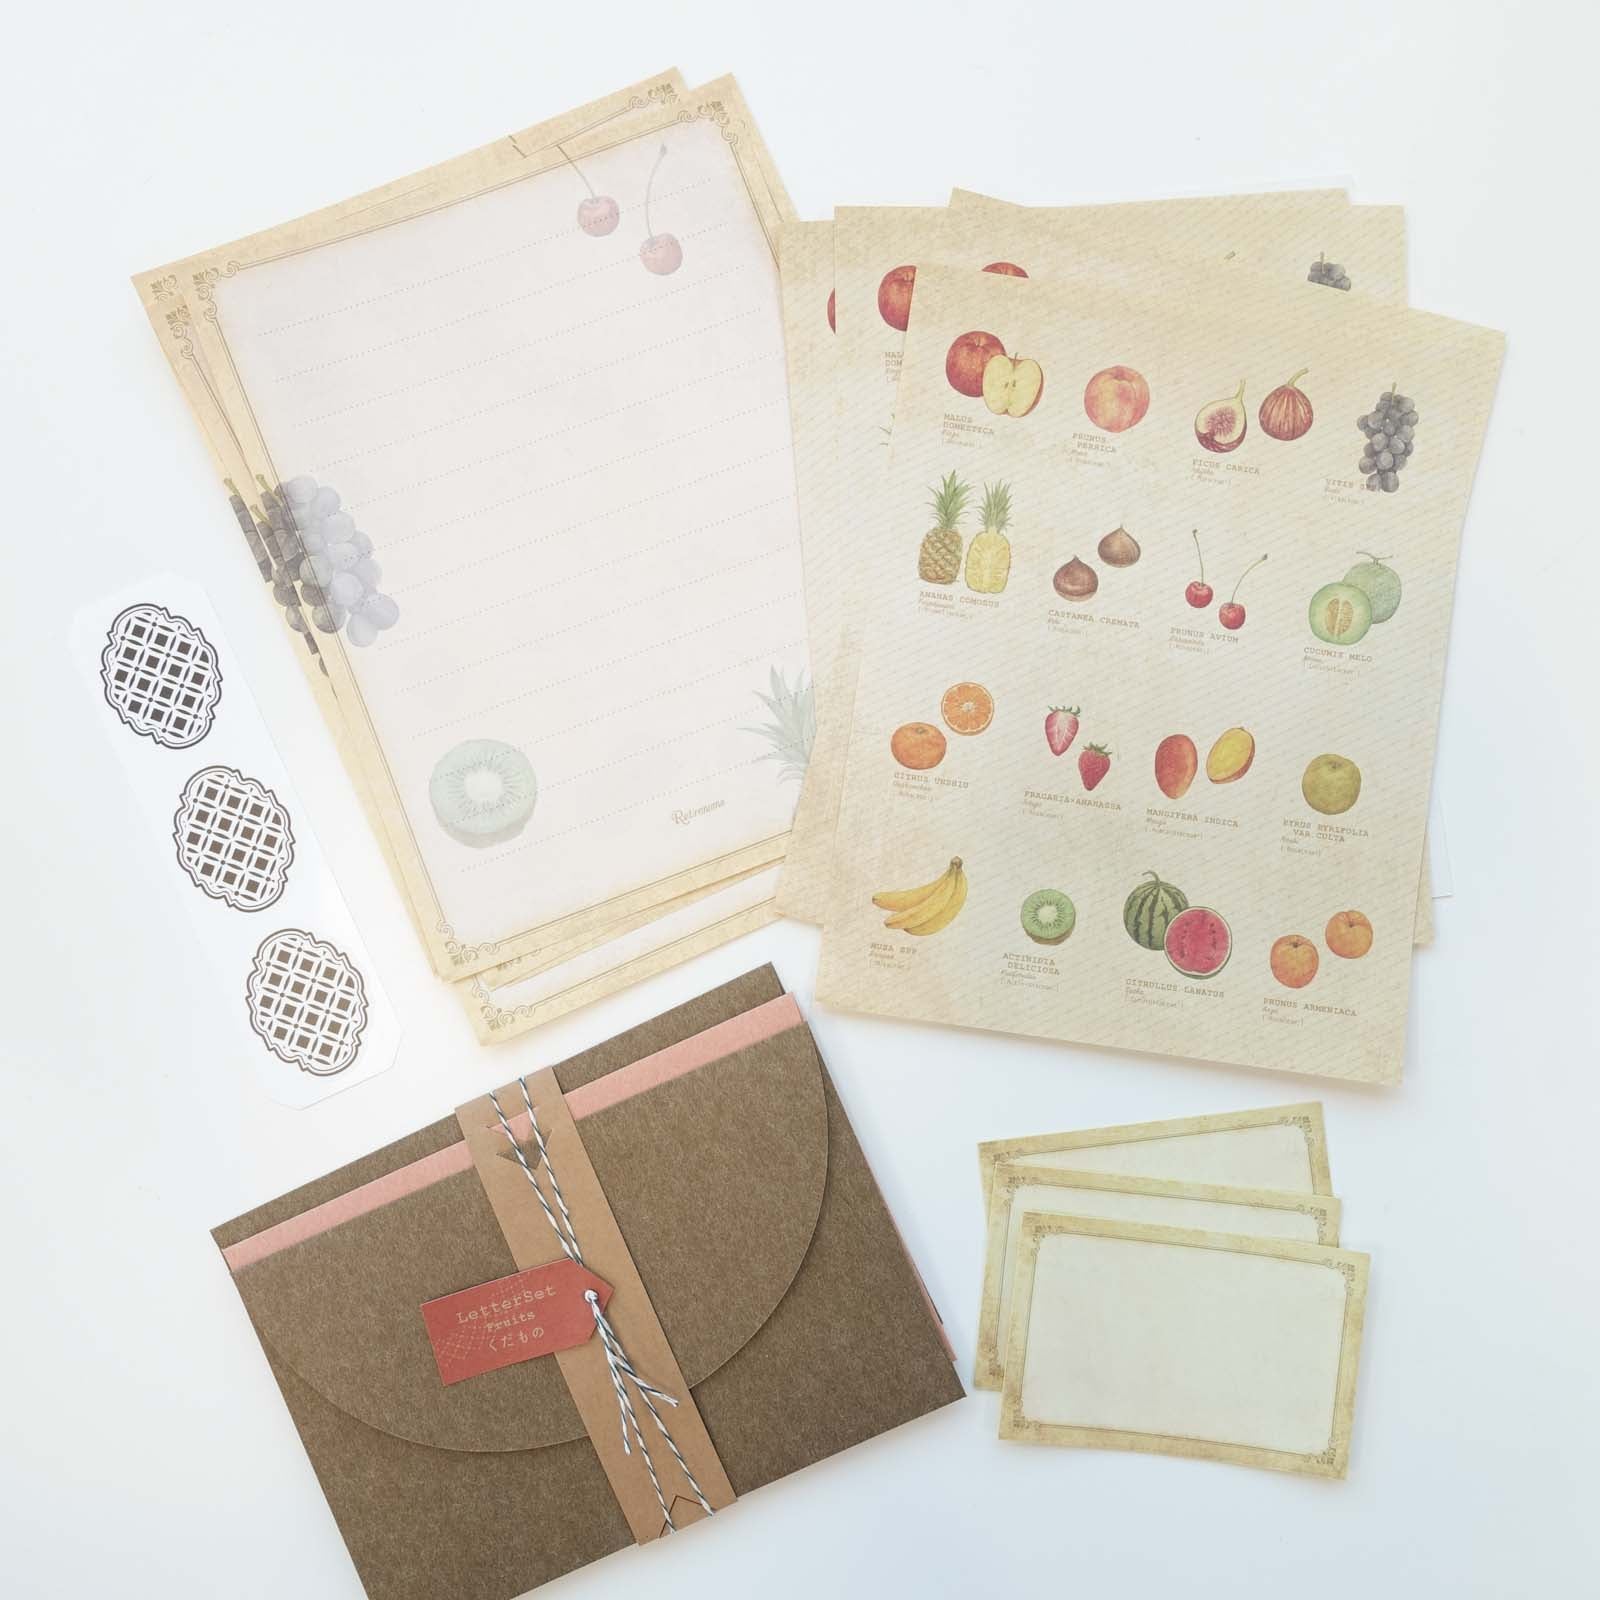 Vintage style premium, double sided, letter writing set featuring fruit illustrations